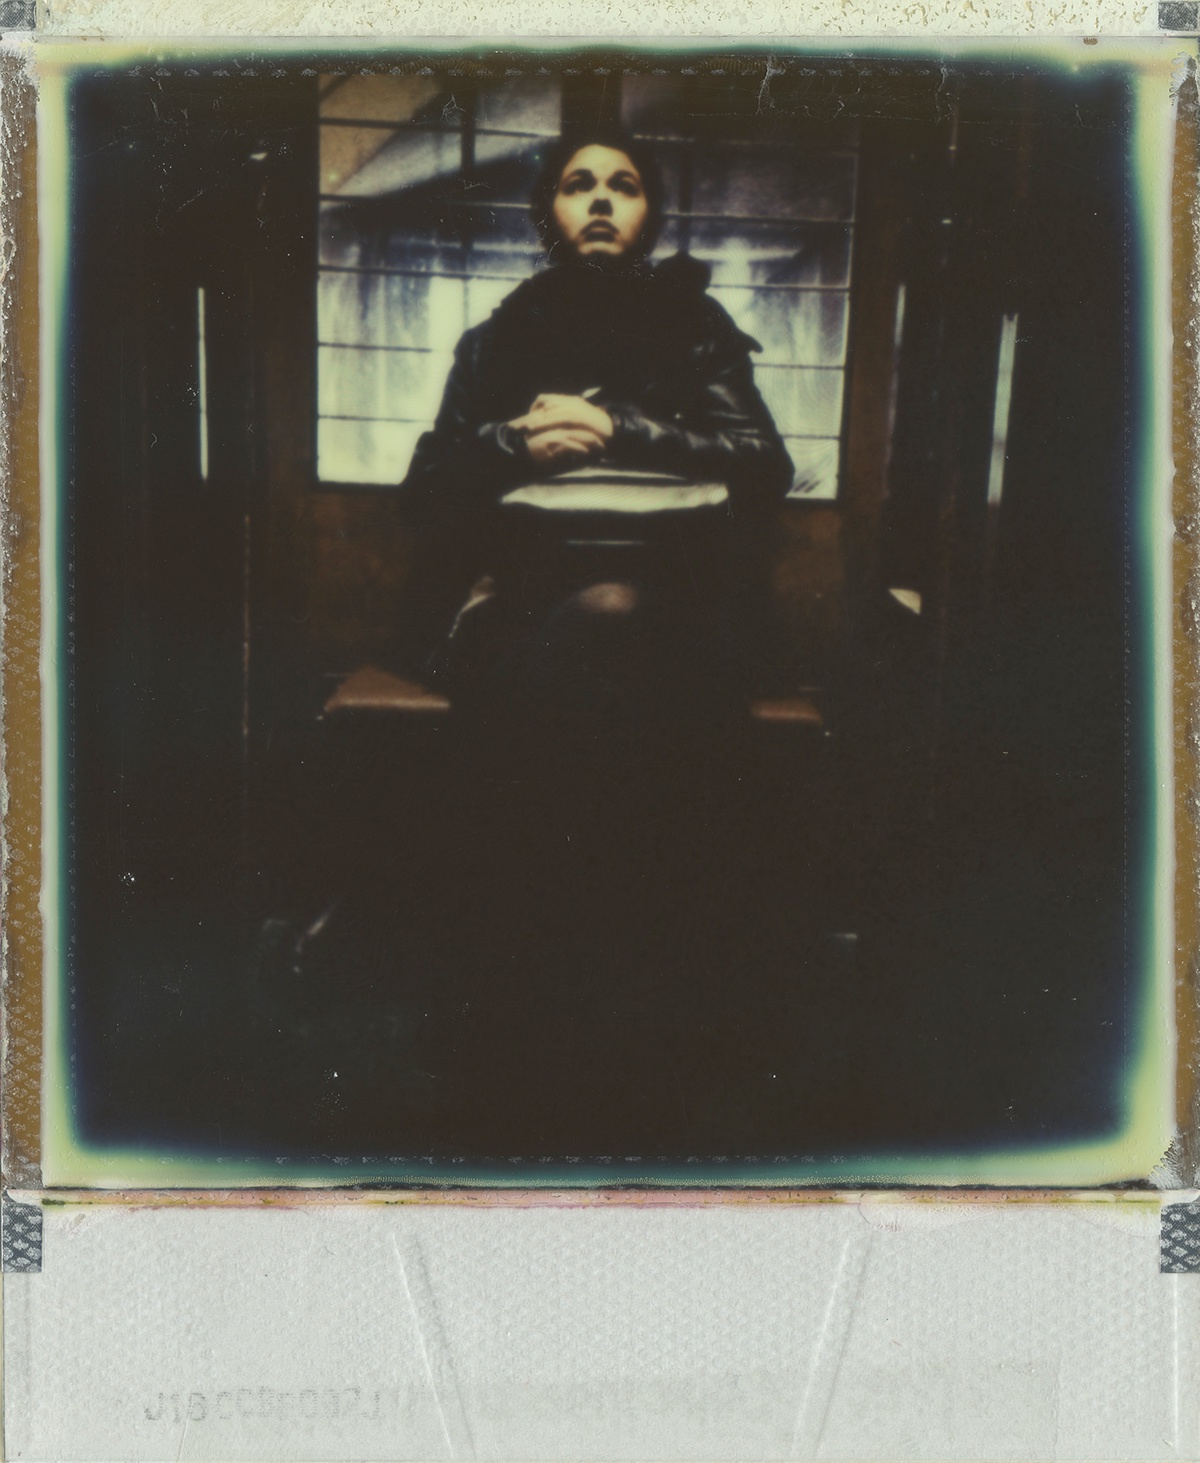 POLAROID impossible color instant analog analogic px600 px680 color600 istantanee   impossibleproject   reportage dimensioni quotidiane portrait portraits